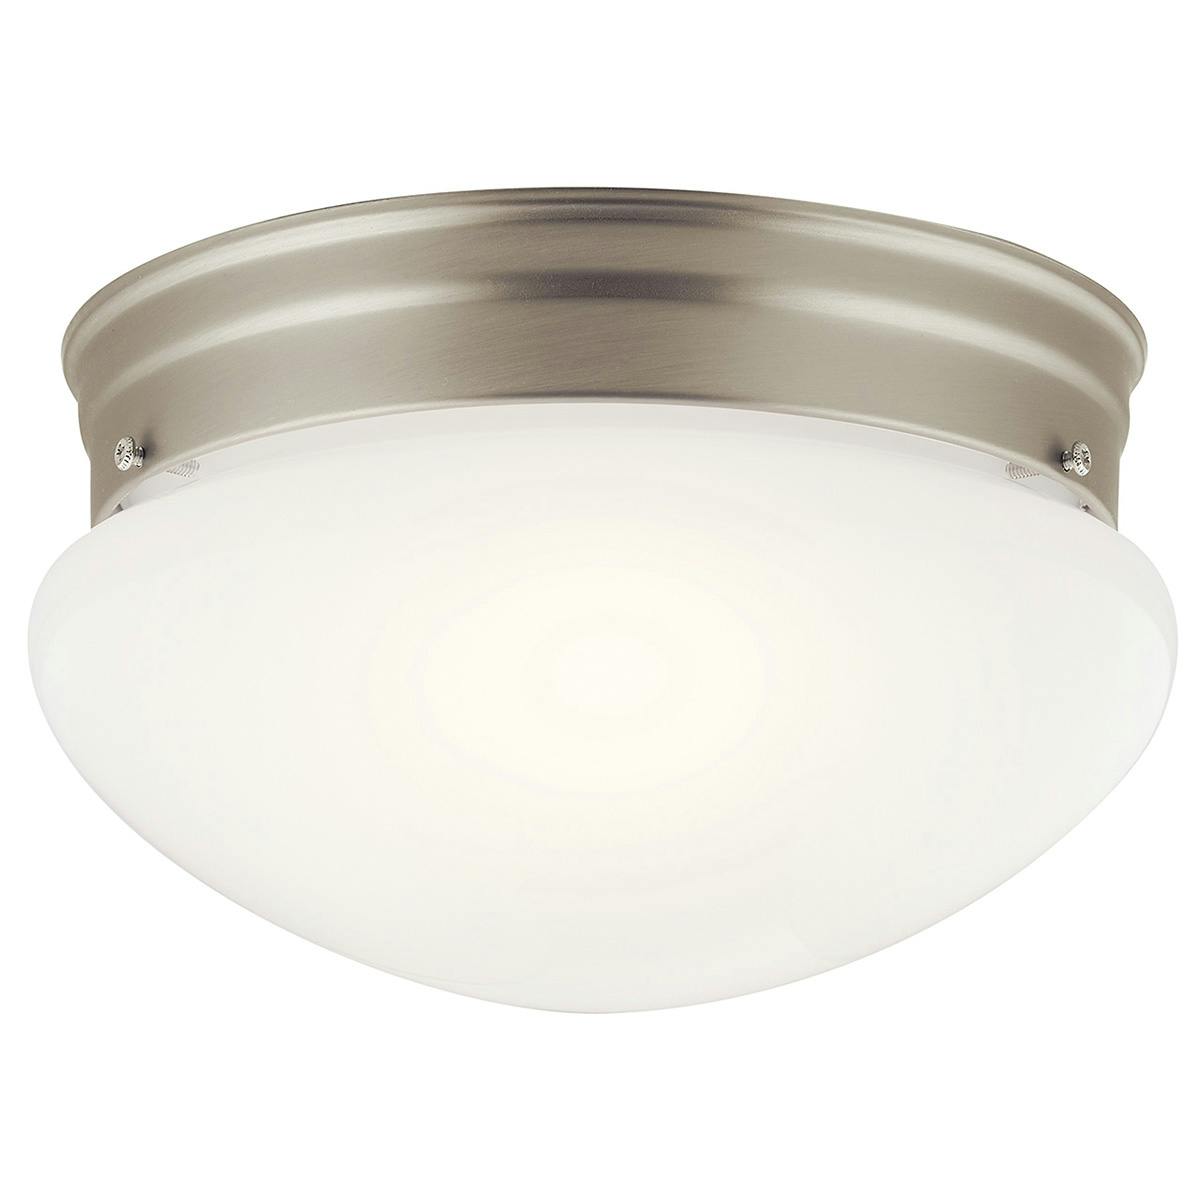 Ceiling Space 2 Light Flush Mount Nickel on a white background